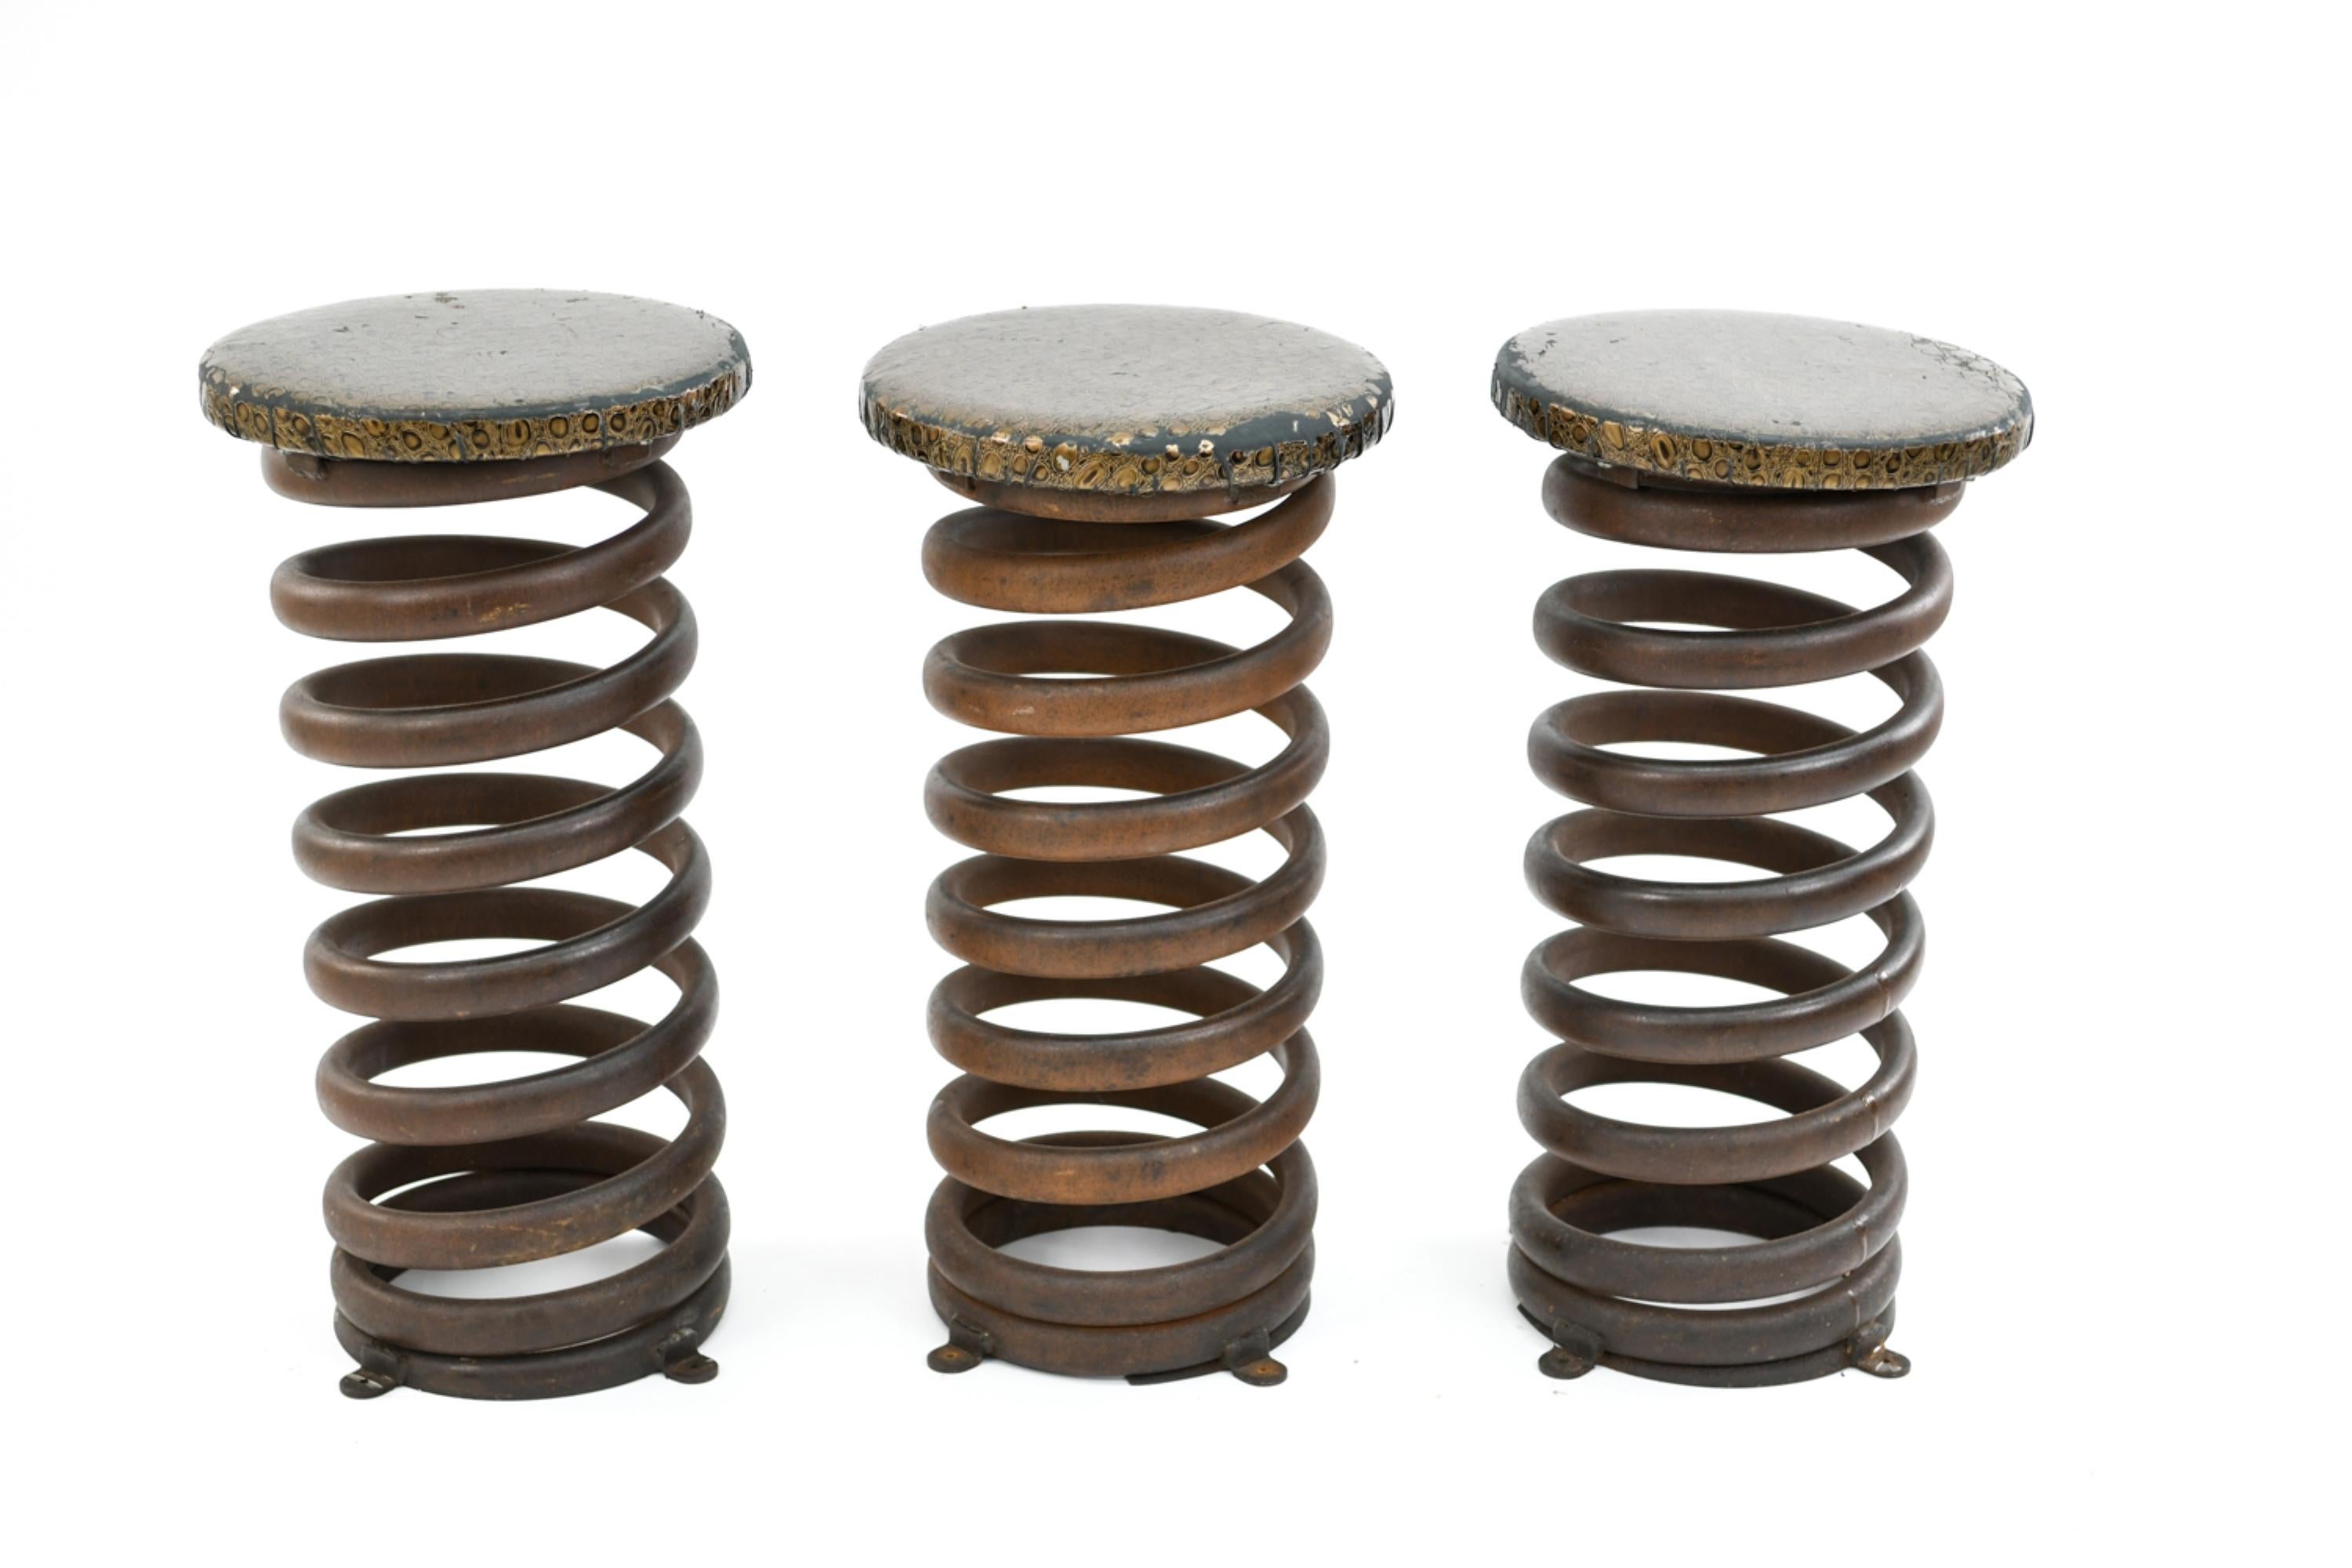 These funky bar stools are a great way to incorporate some industrial design into your living space. These barstools would be wonderful to accessorize a kitchen island or bar area. Featuring unusual coiled steel bases with attractively worn faux